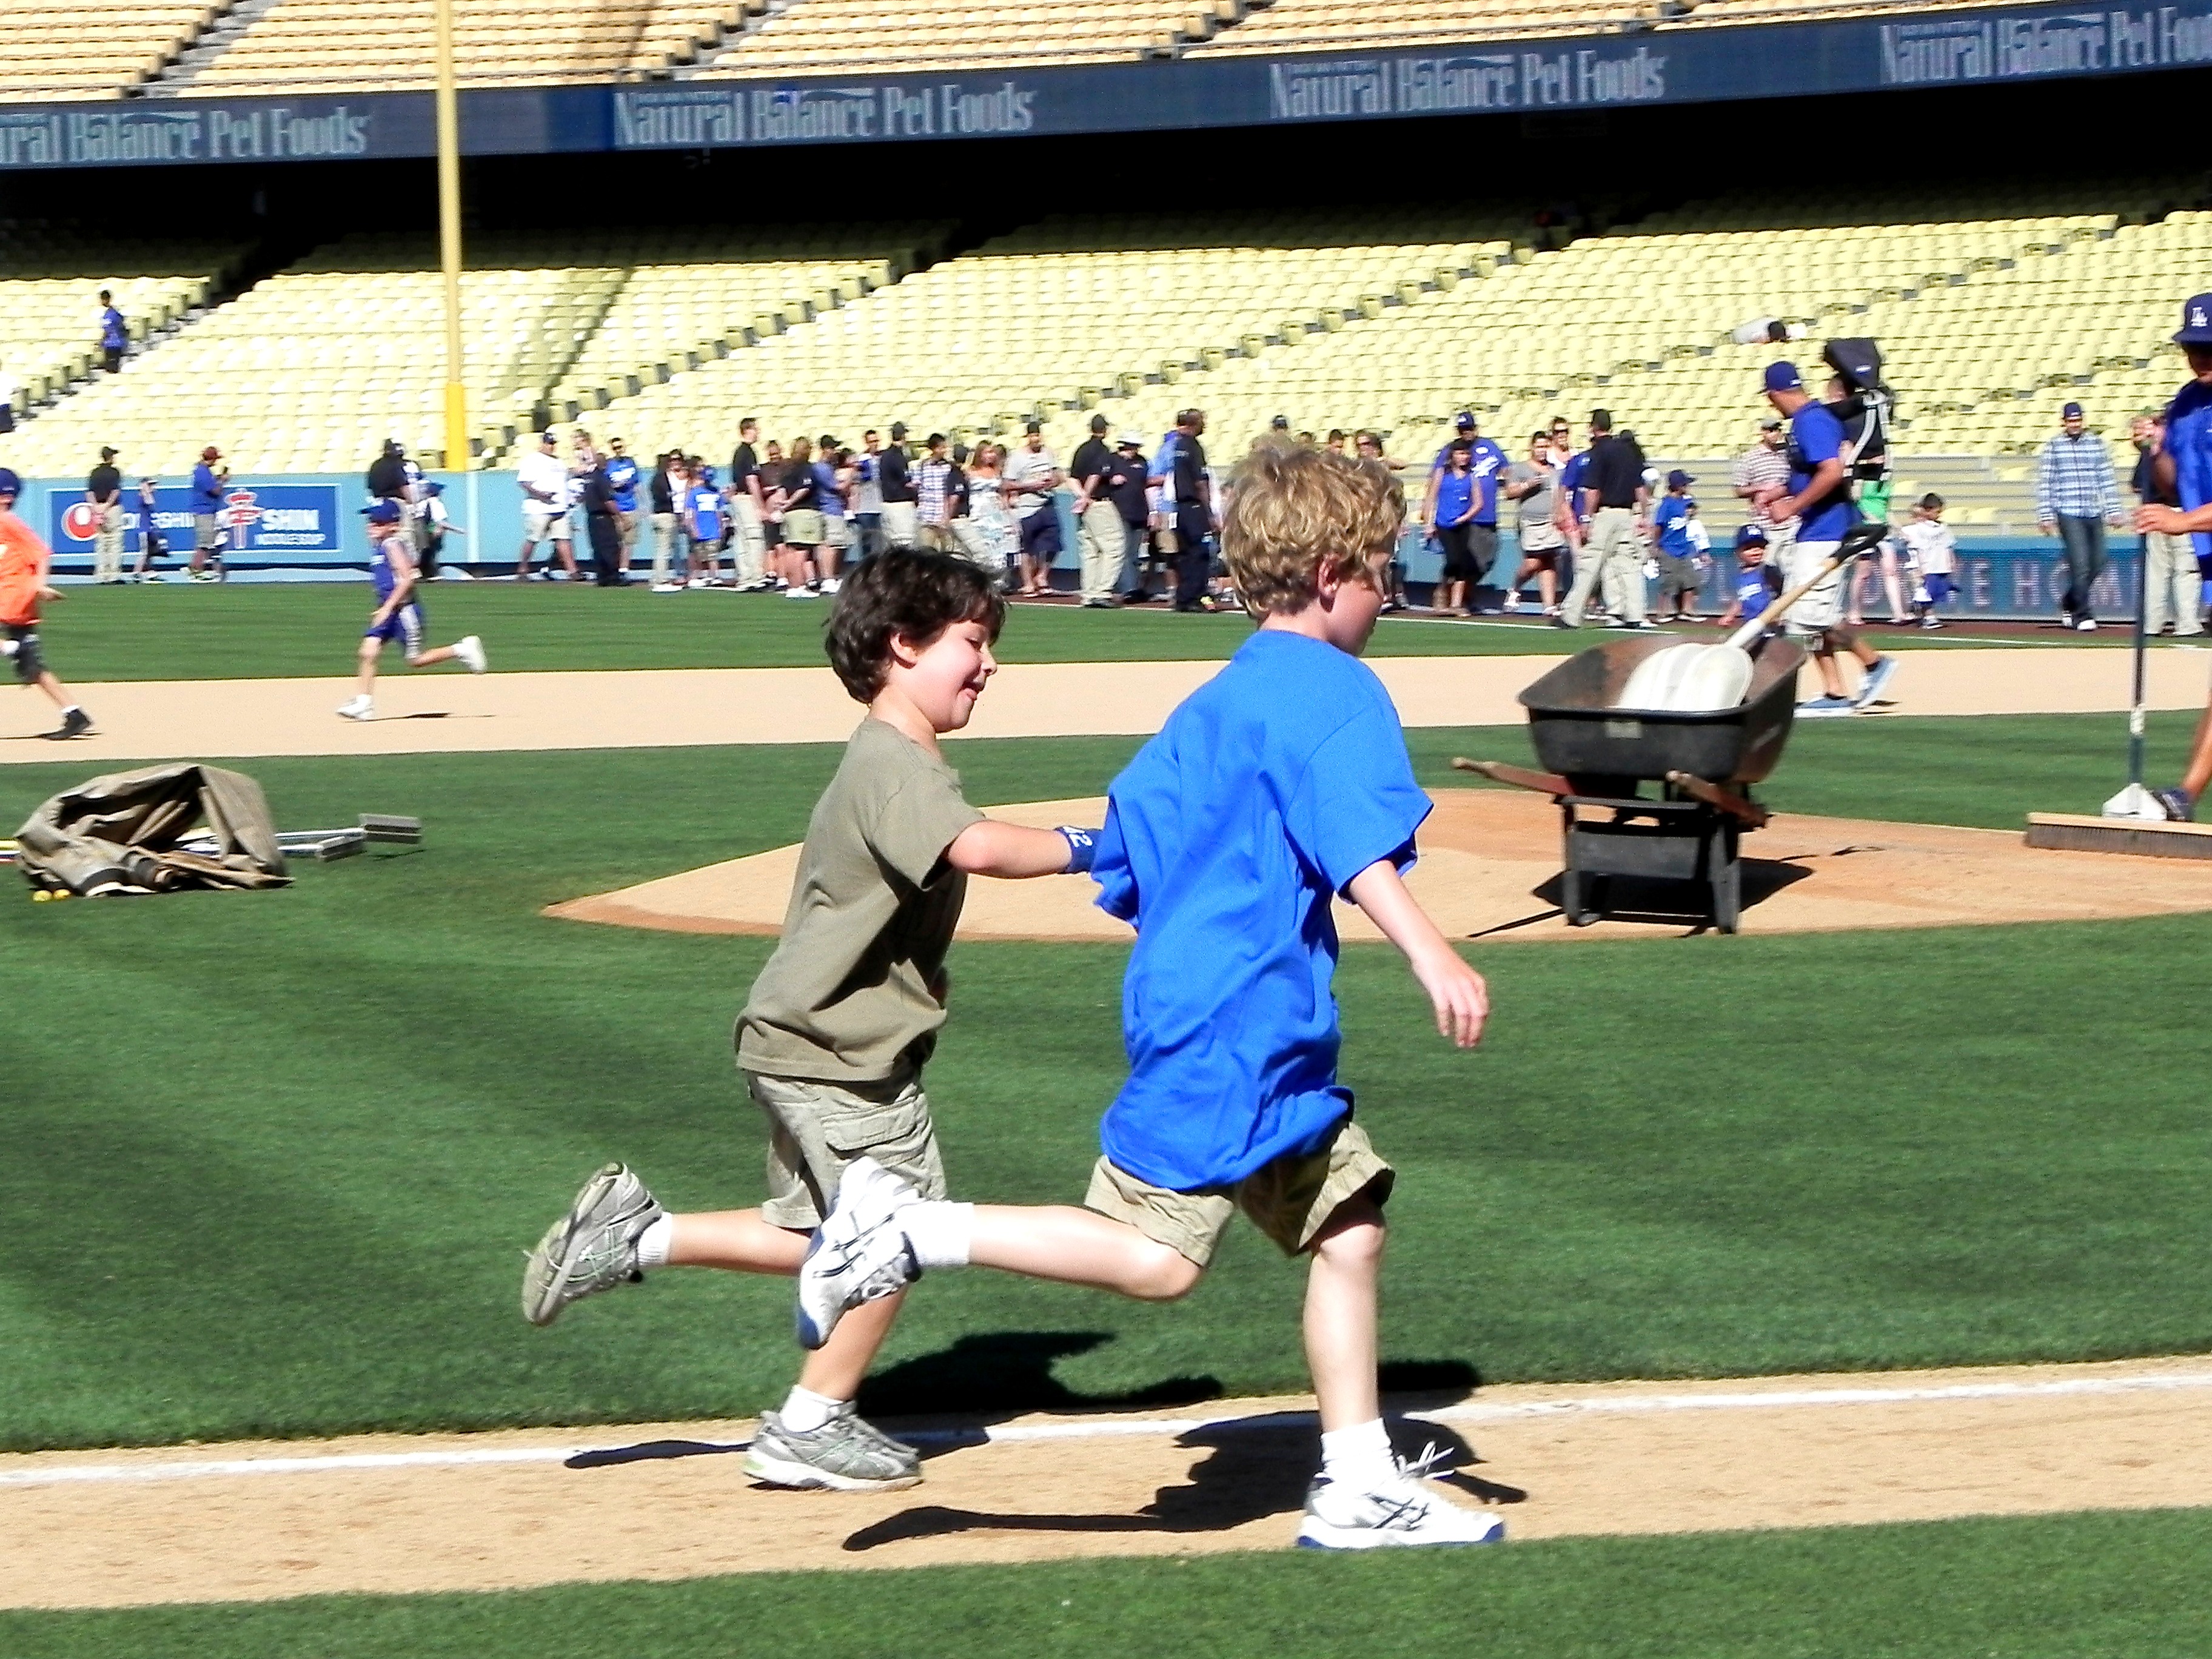 boys running bases (photo by Yvonne Condes)